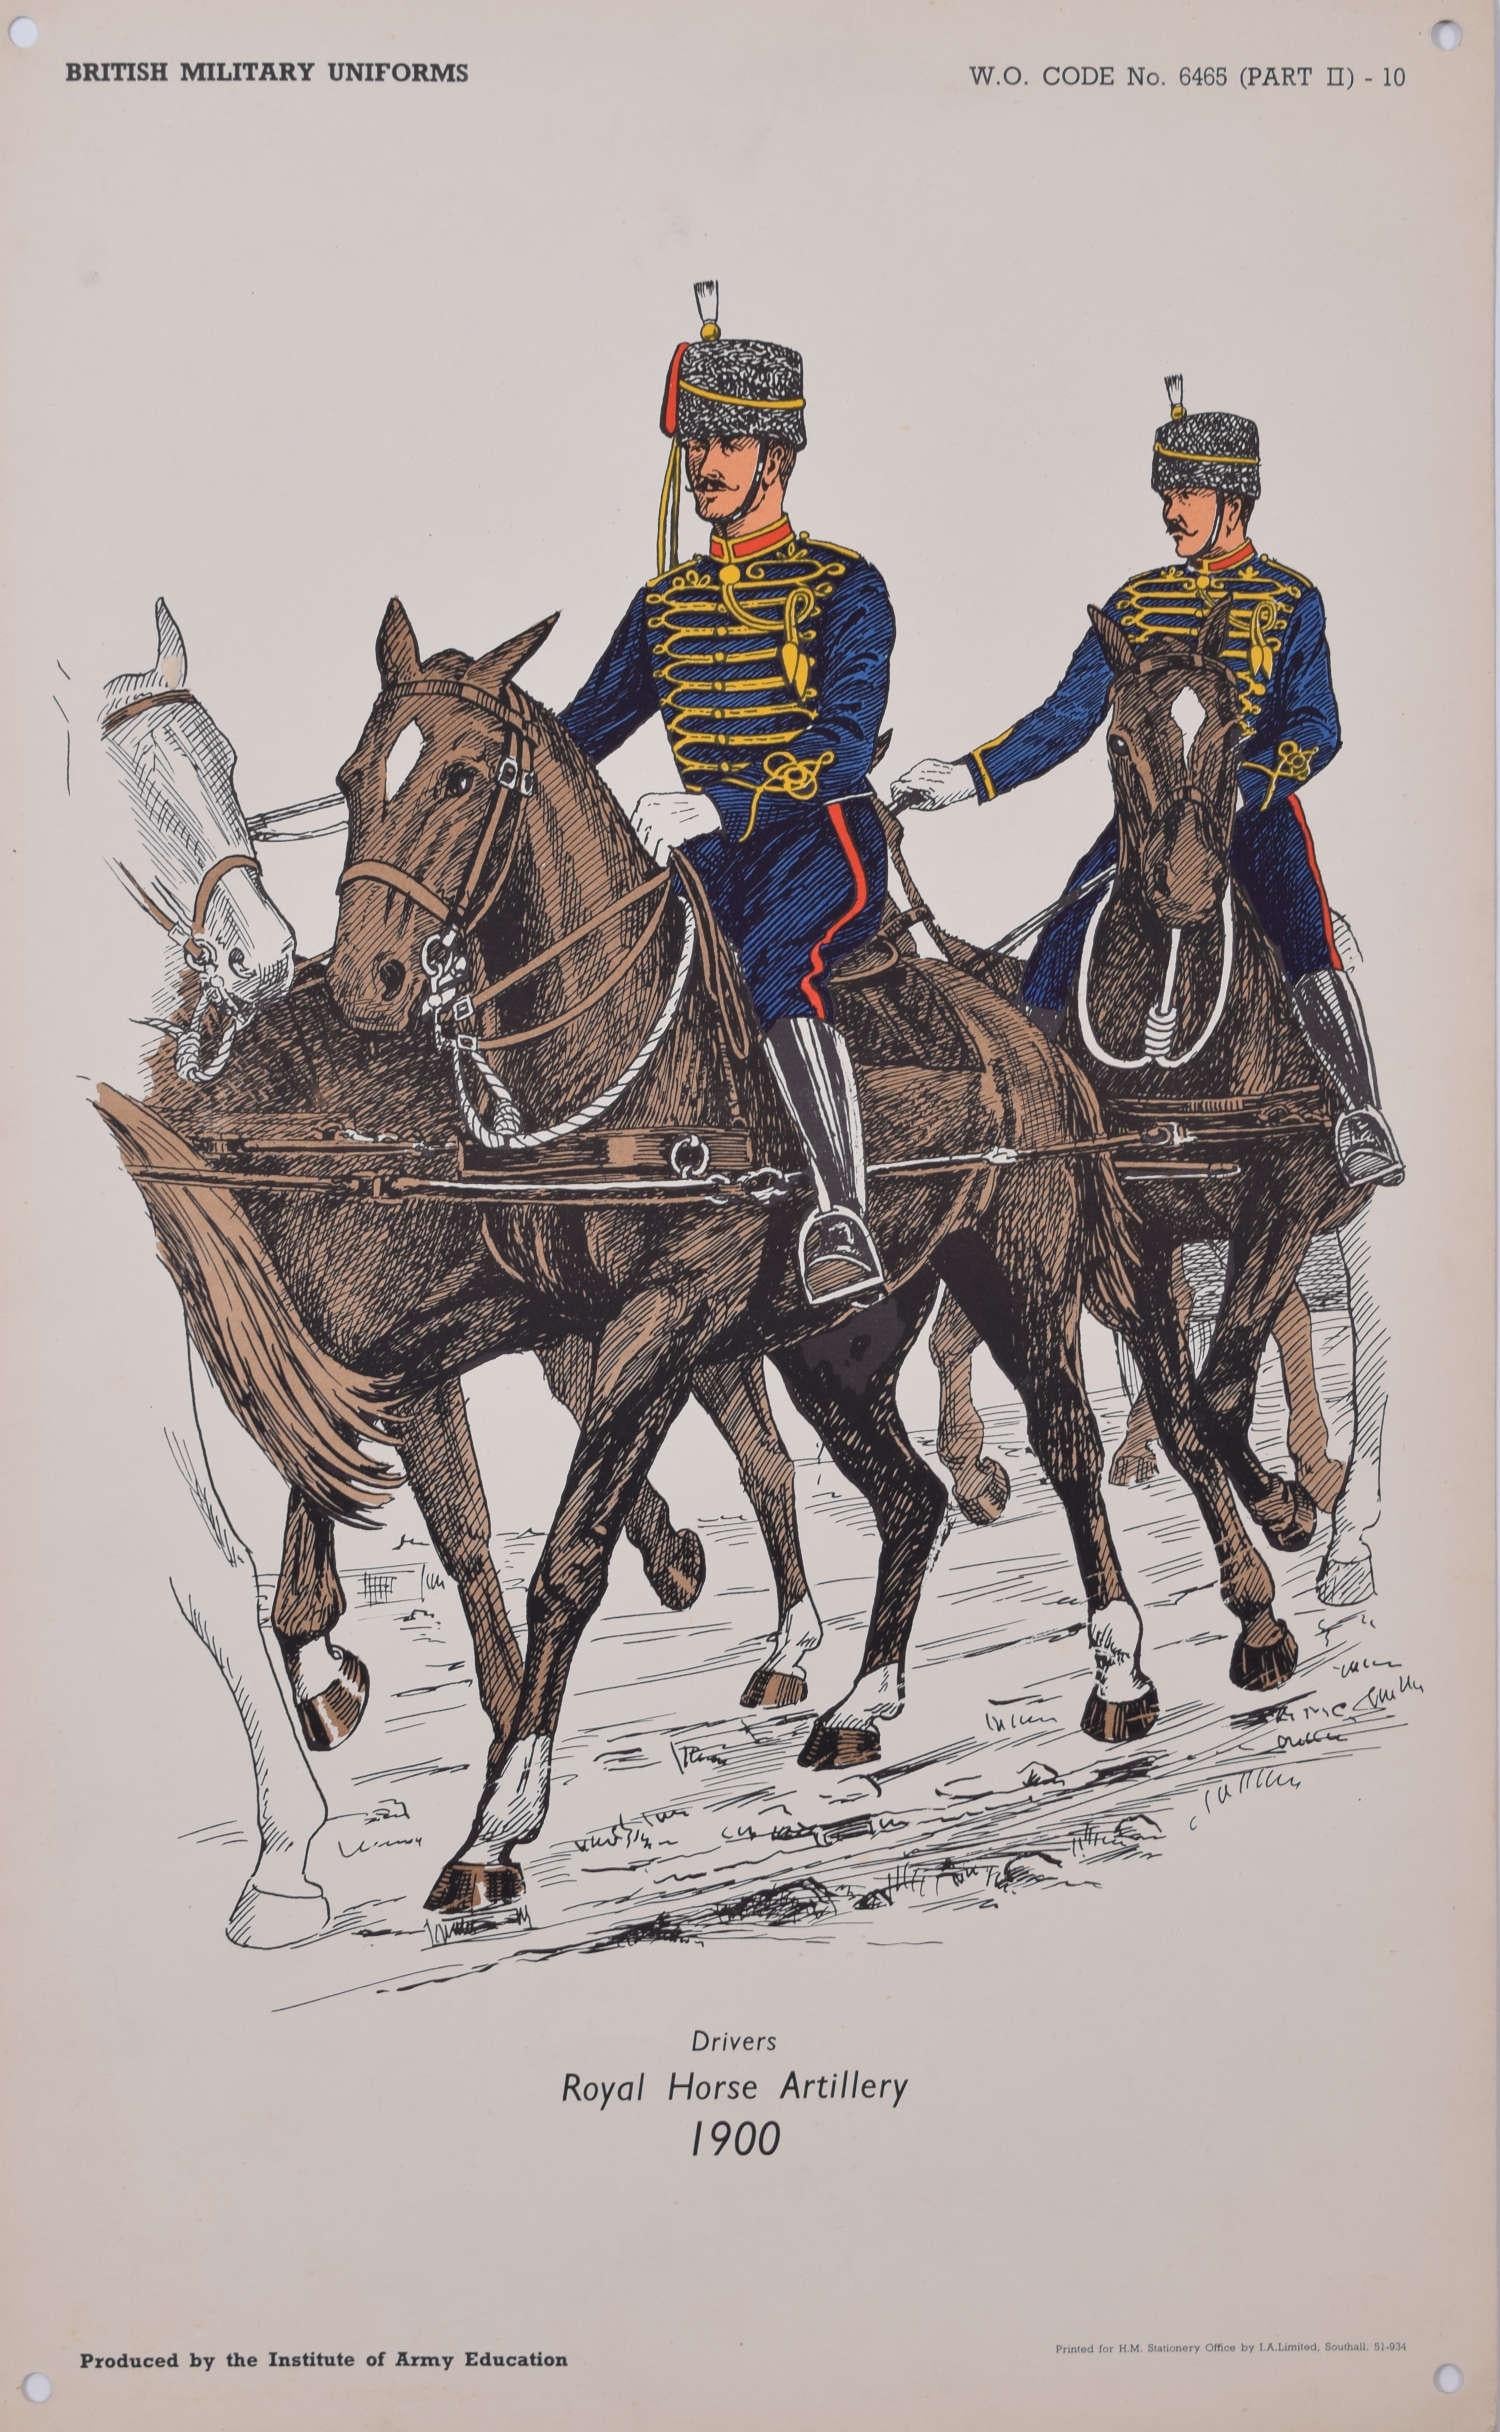 Royal Horse Artillery Drivers Institute of Army Education uniform lithograph